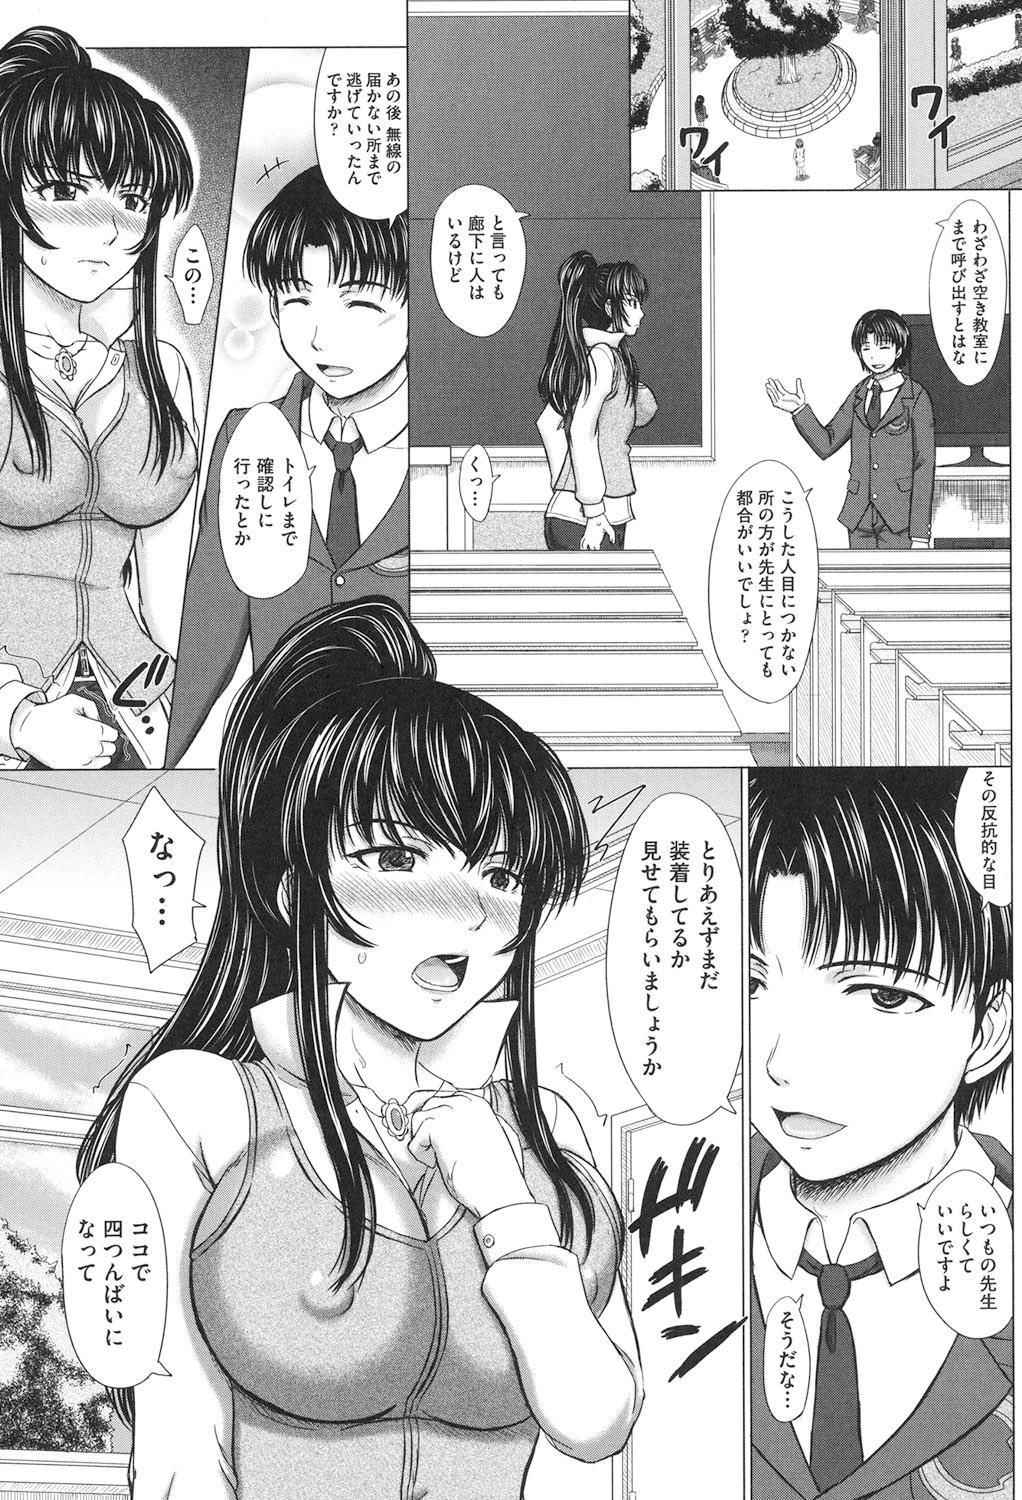 Houkago Kouhai Note - After School Mating Notes 89